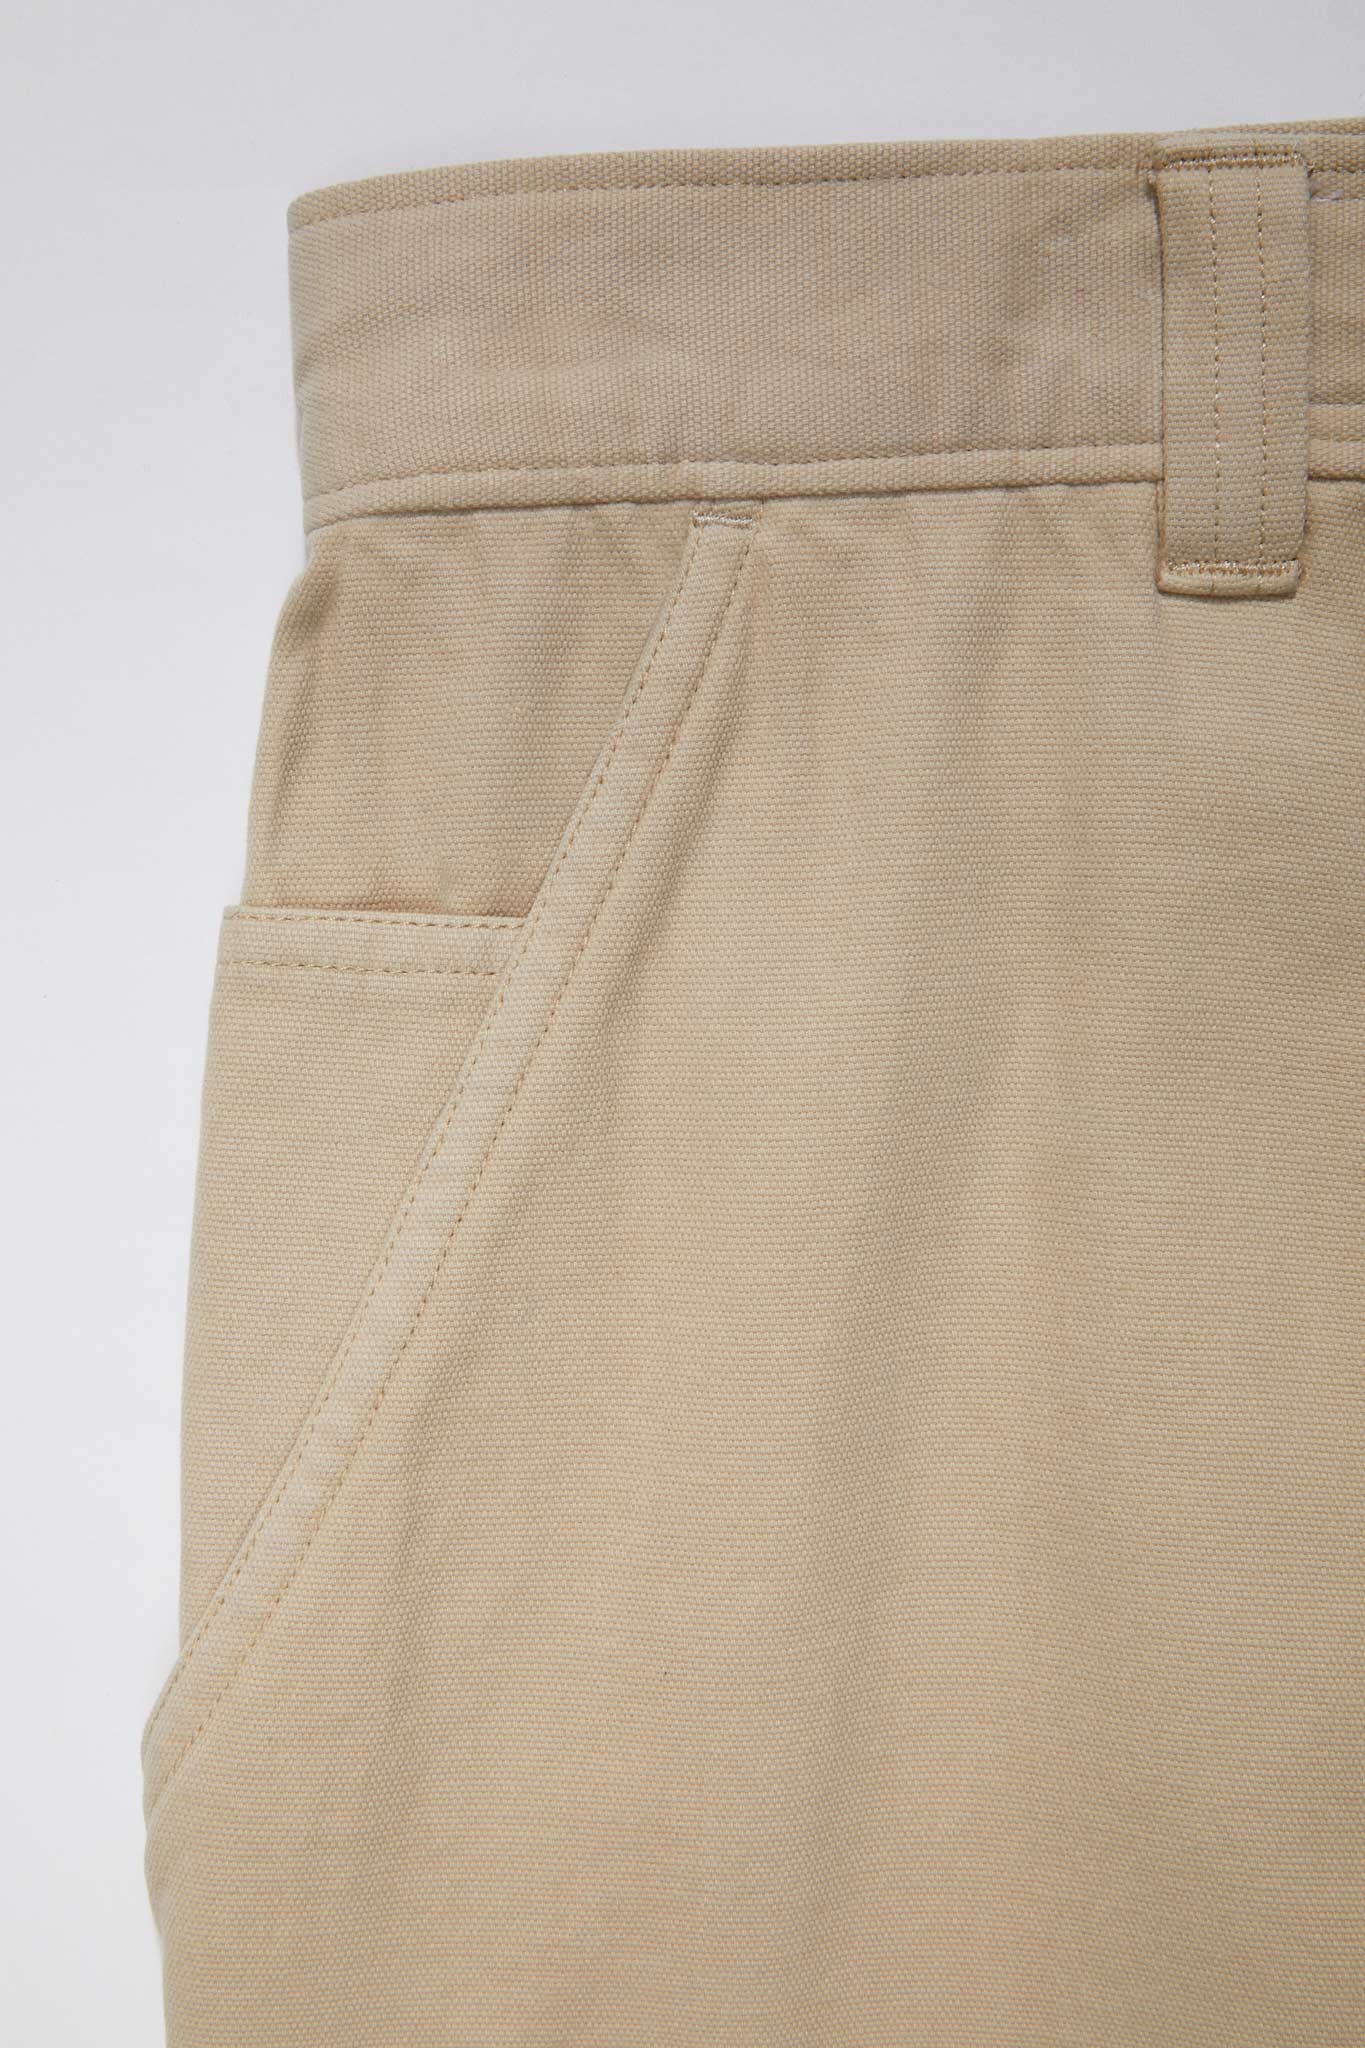 Stretch Cord Wide Leg Pant - Cord Brown | Faherty Brand